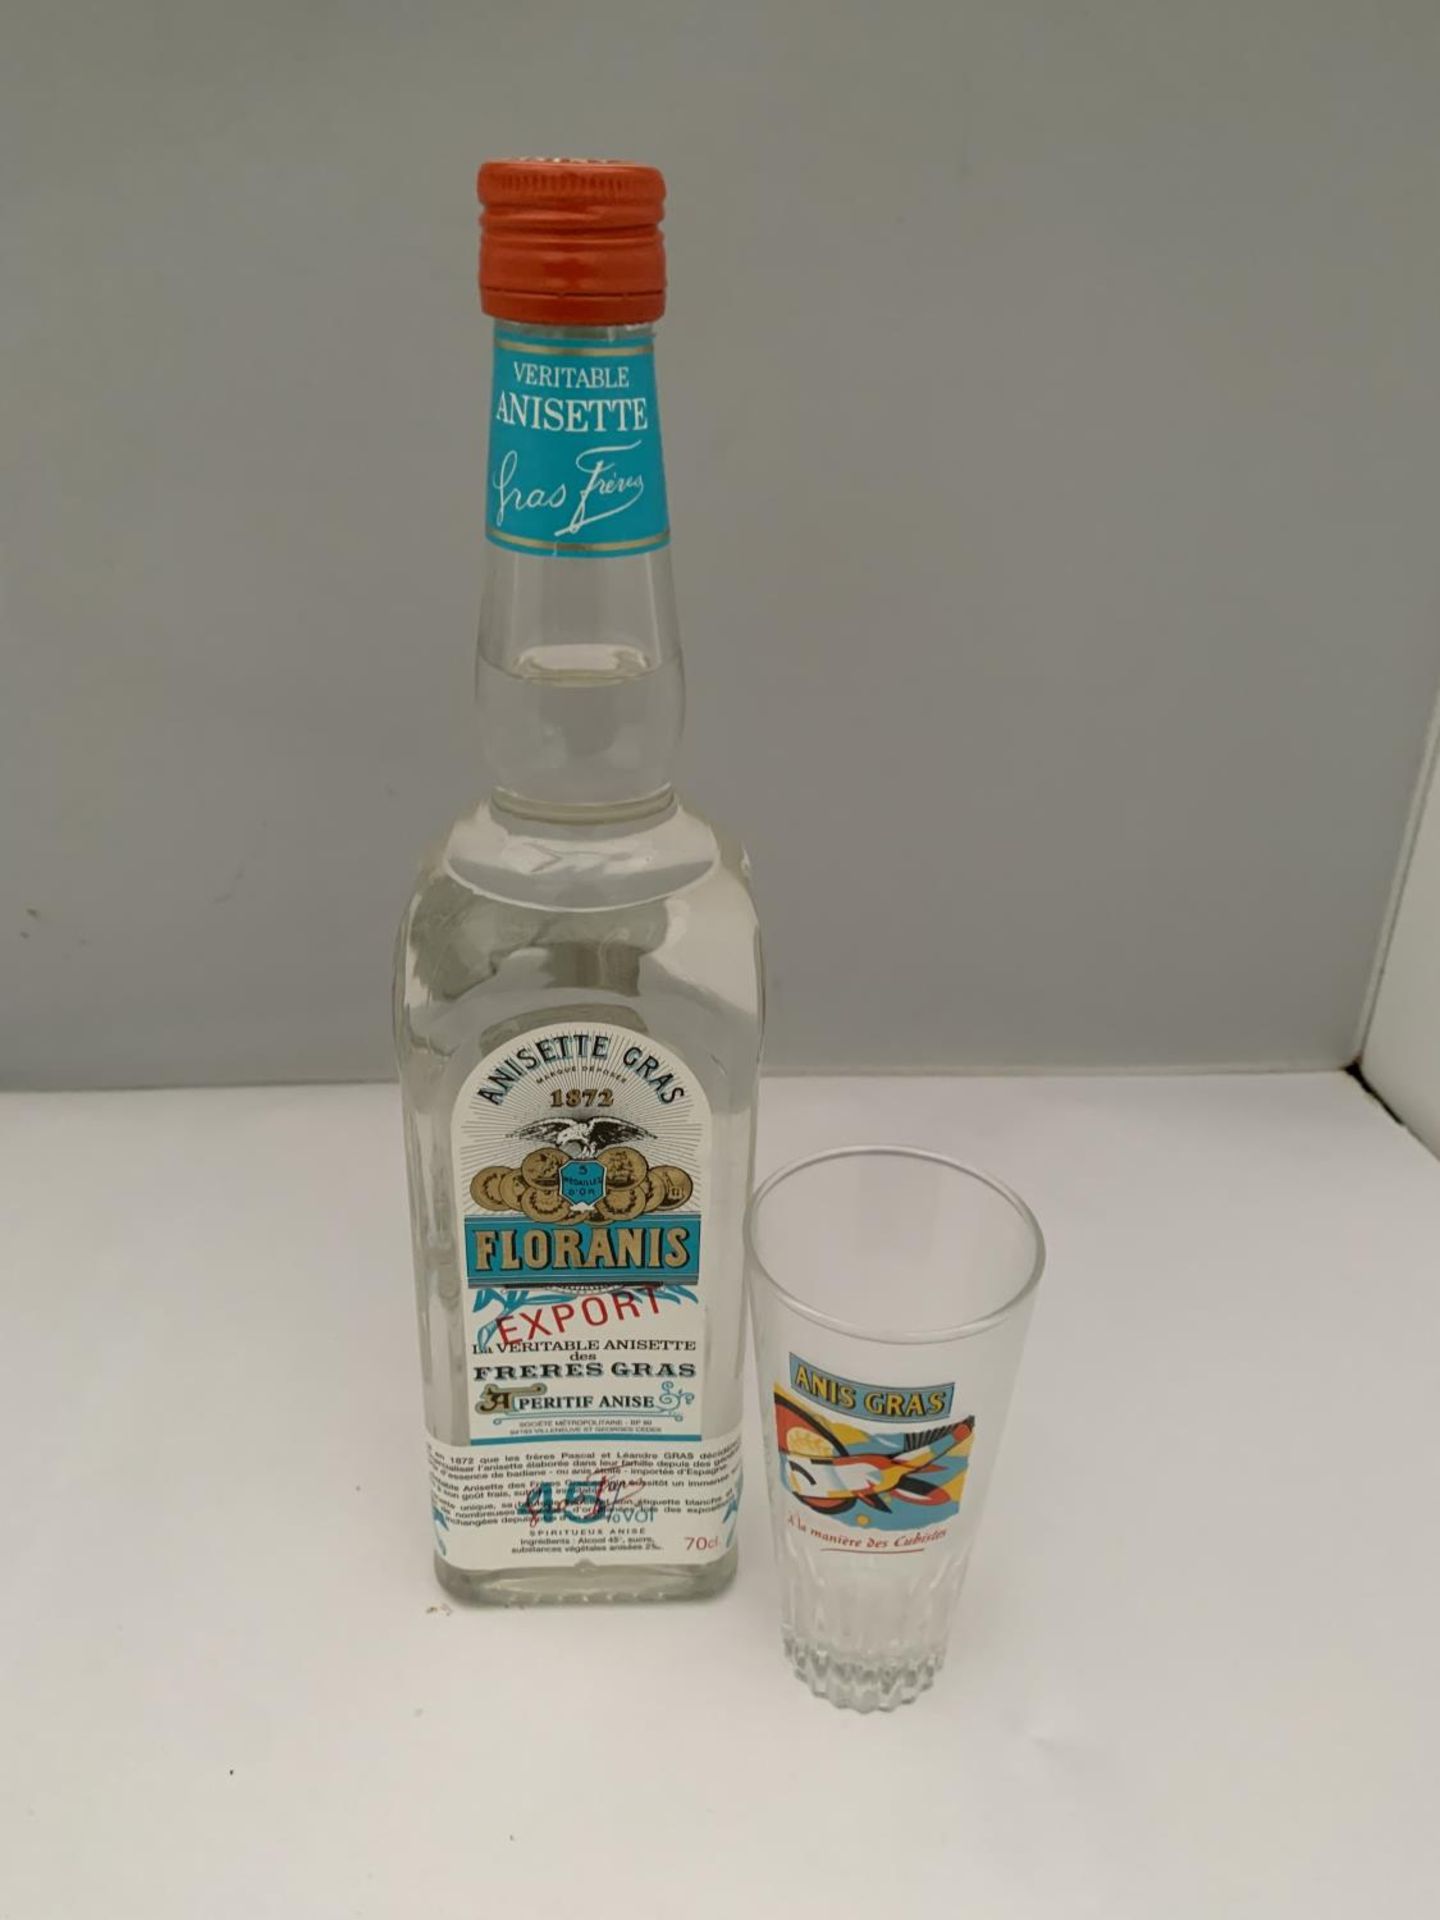 A LITRE BOTTLE OF ANISETTE GRAS 1872 FLORANIS EXPORT PERITIF ANISE 45% VOL WITH AN ANIS GRAS GLASS